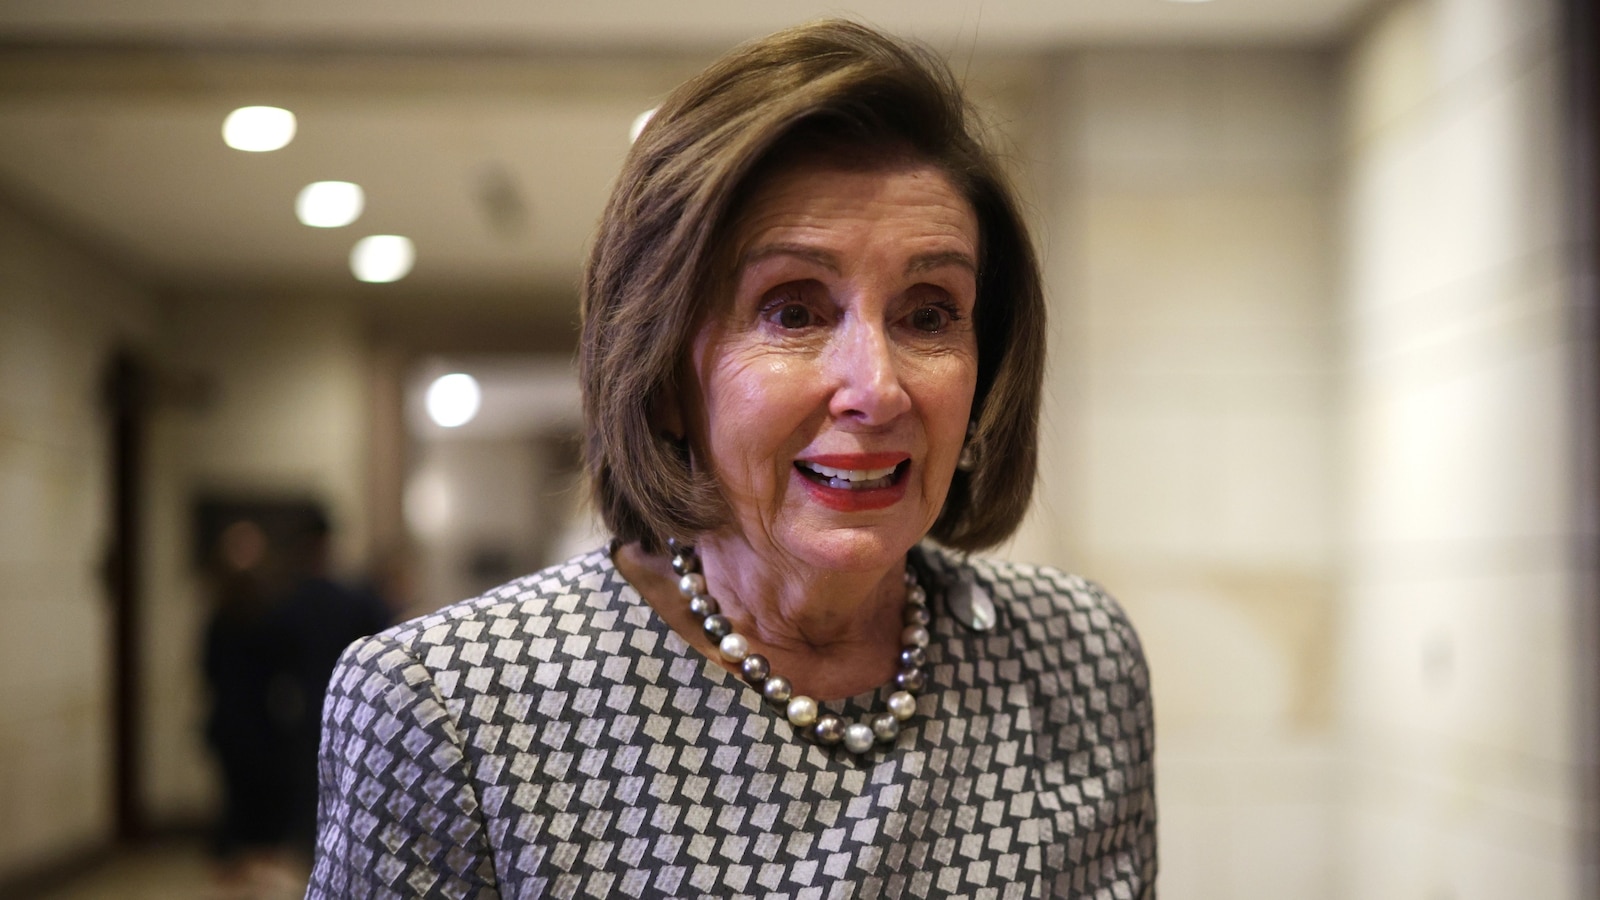 Pelosi noncommittal on whether she wants Biden to run: 'Whatever he decides to do'